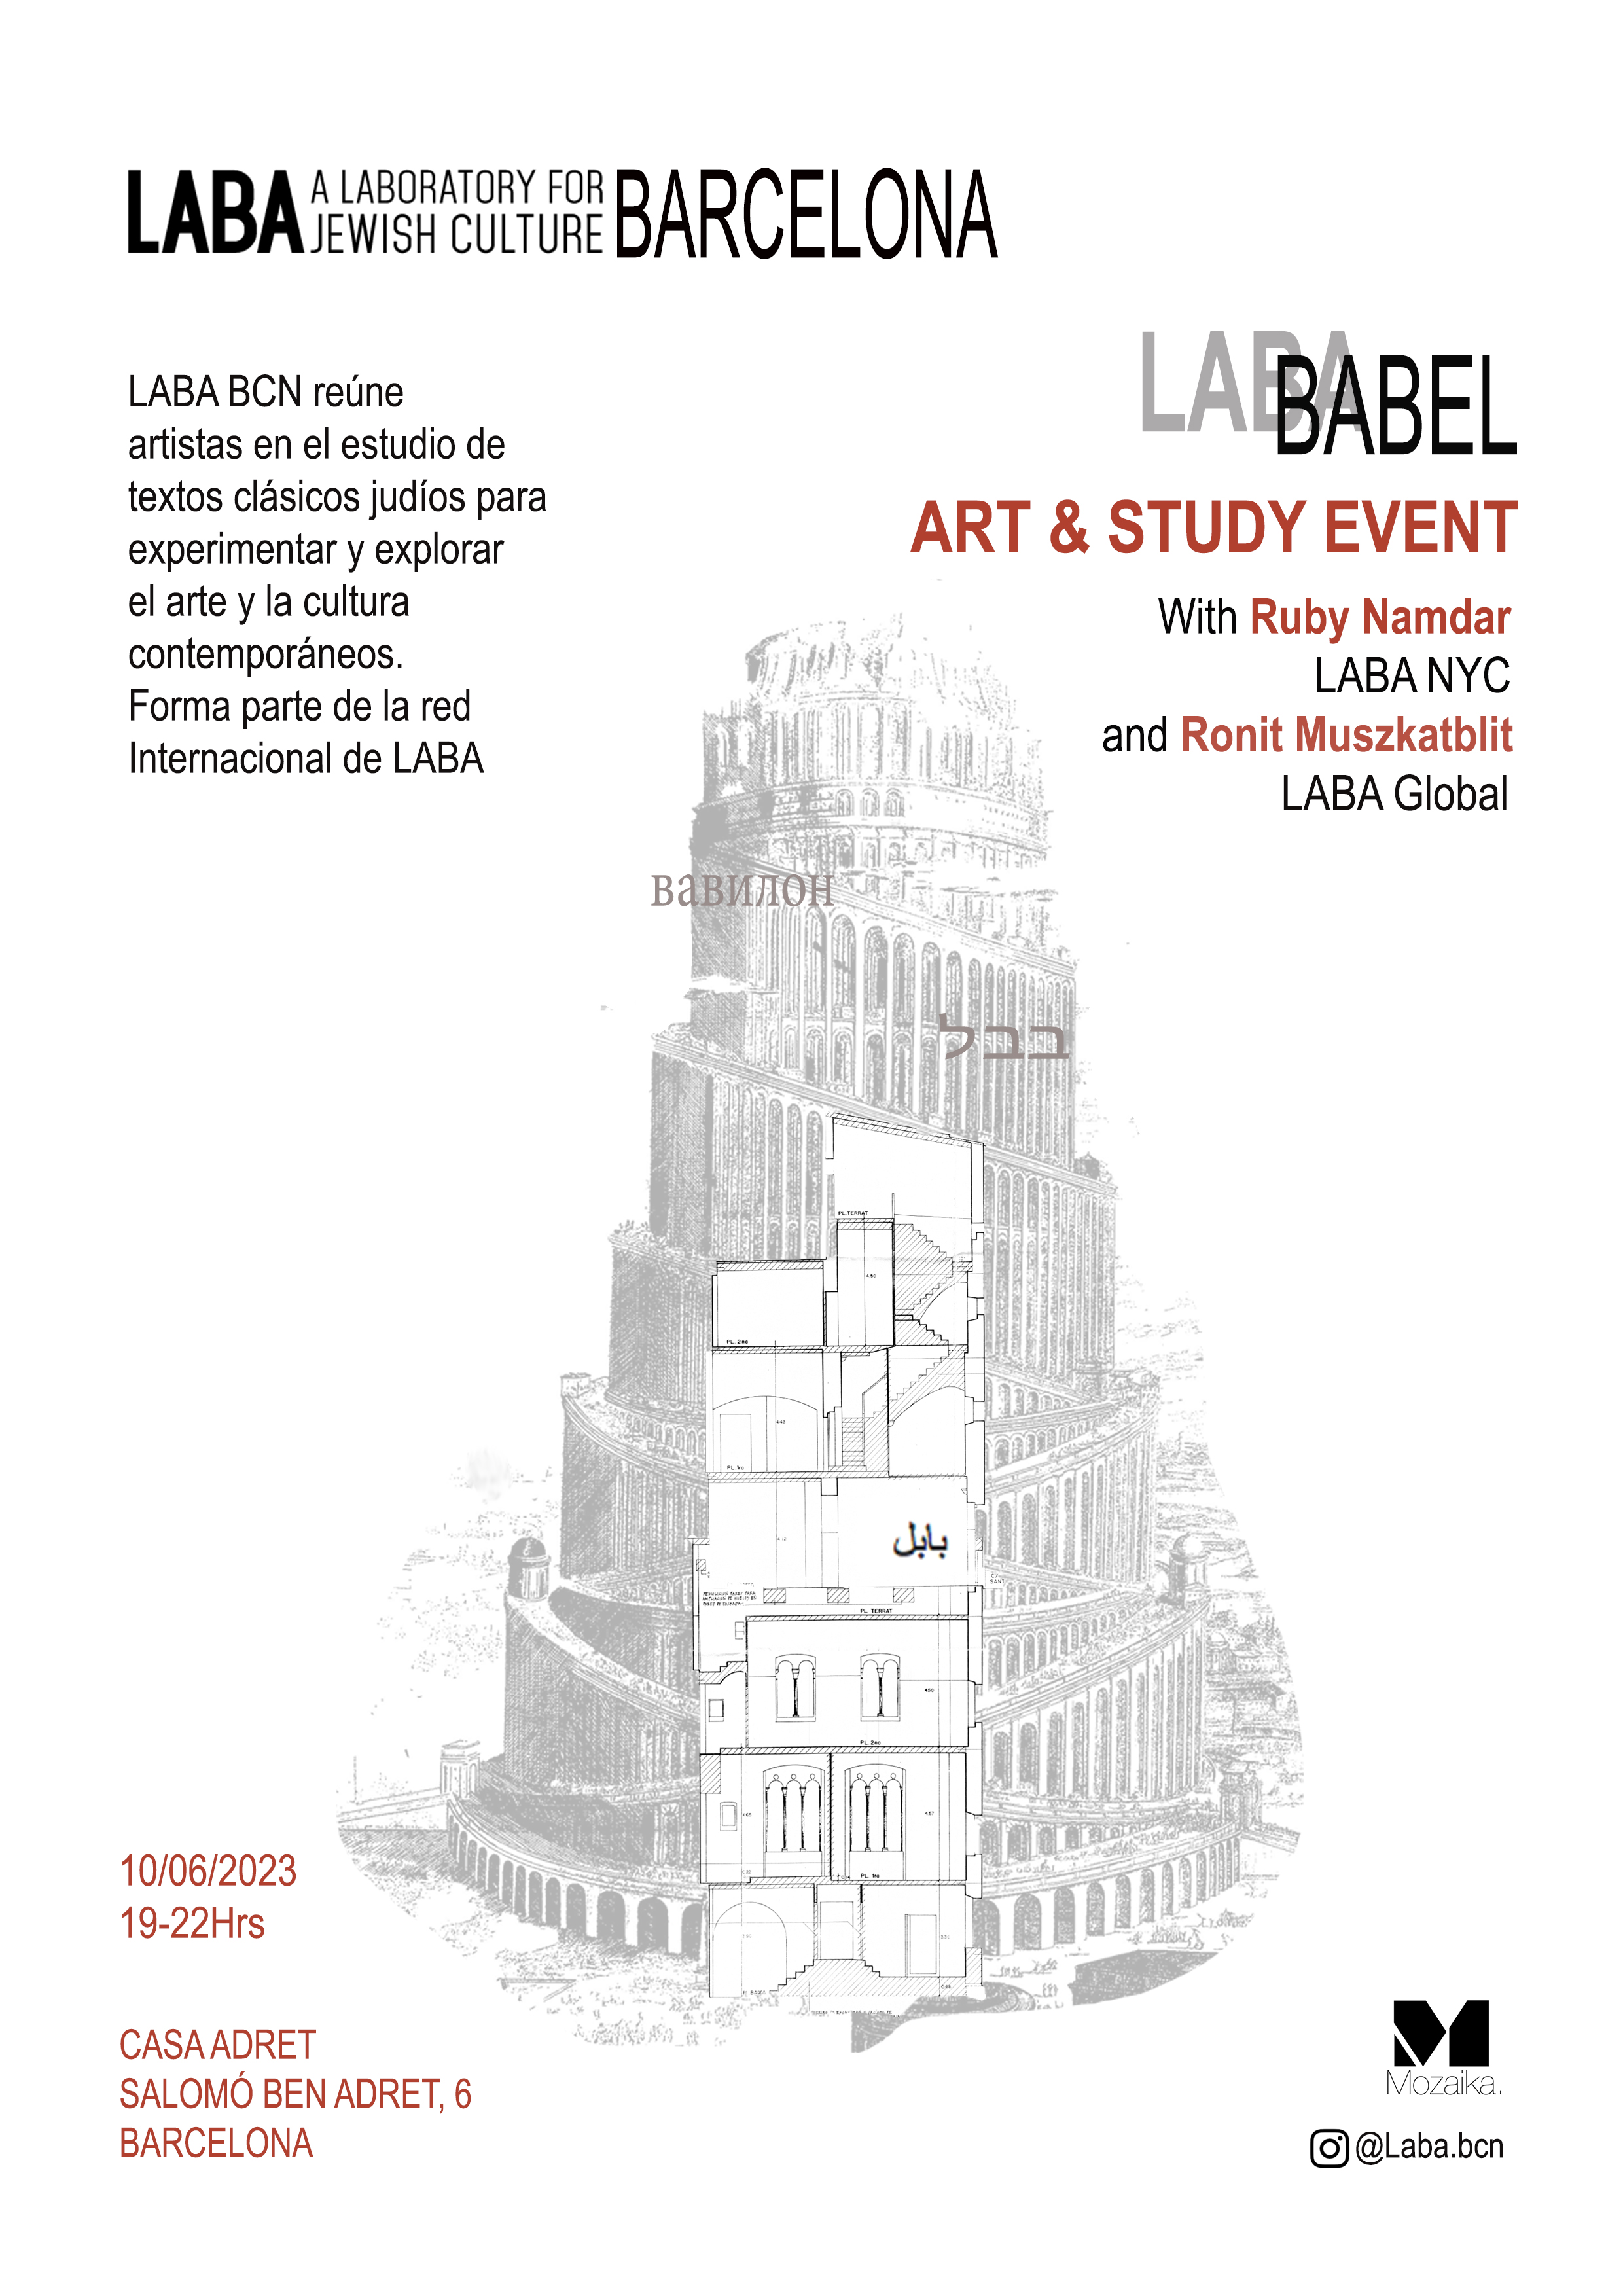 Launching event of LABA Barcelona at Casa Adret, June 10th, 2023